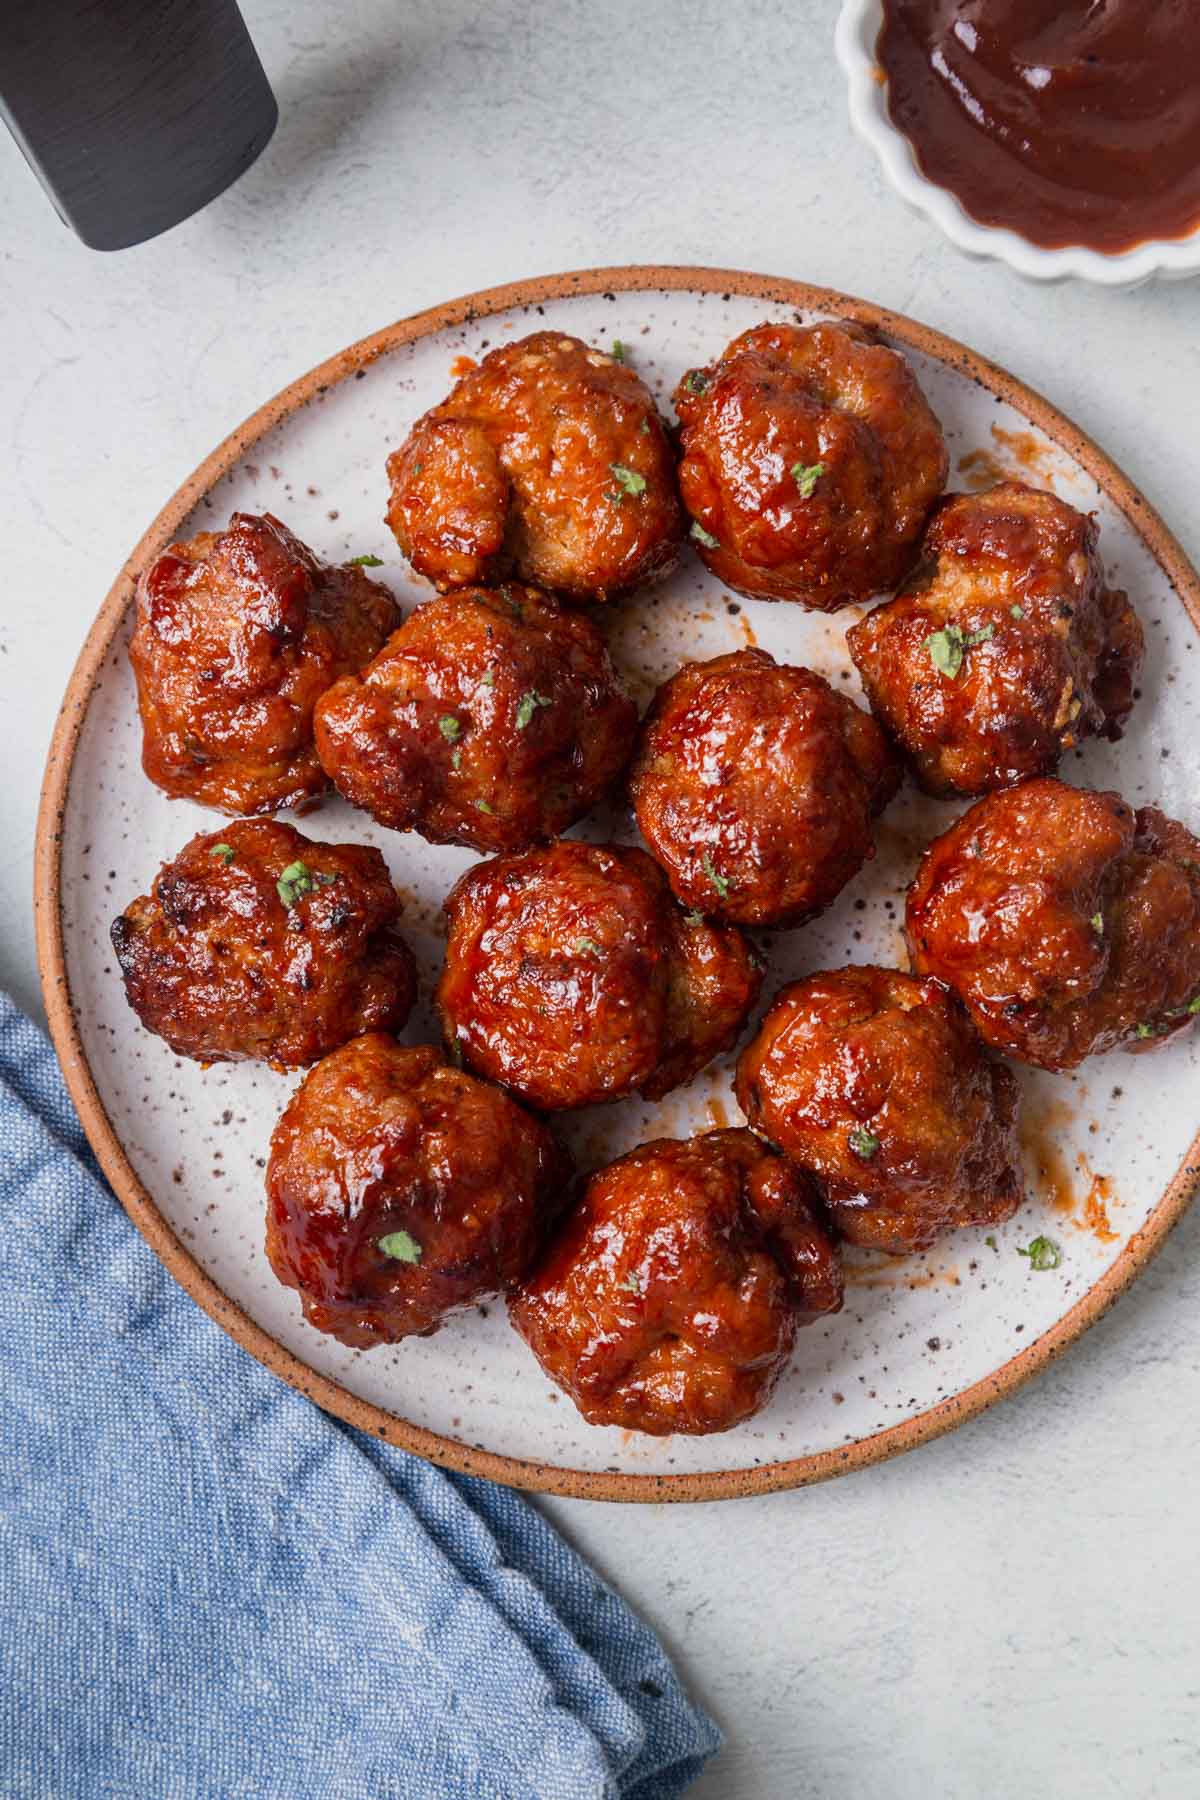 bbq meatballs from the air fryer on a white plate.